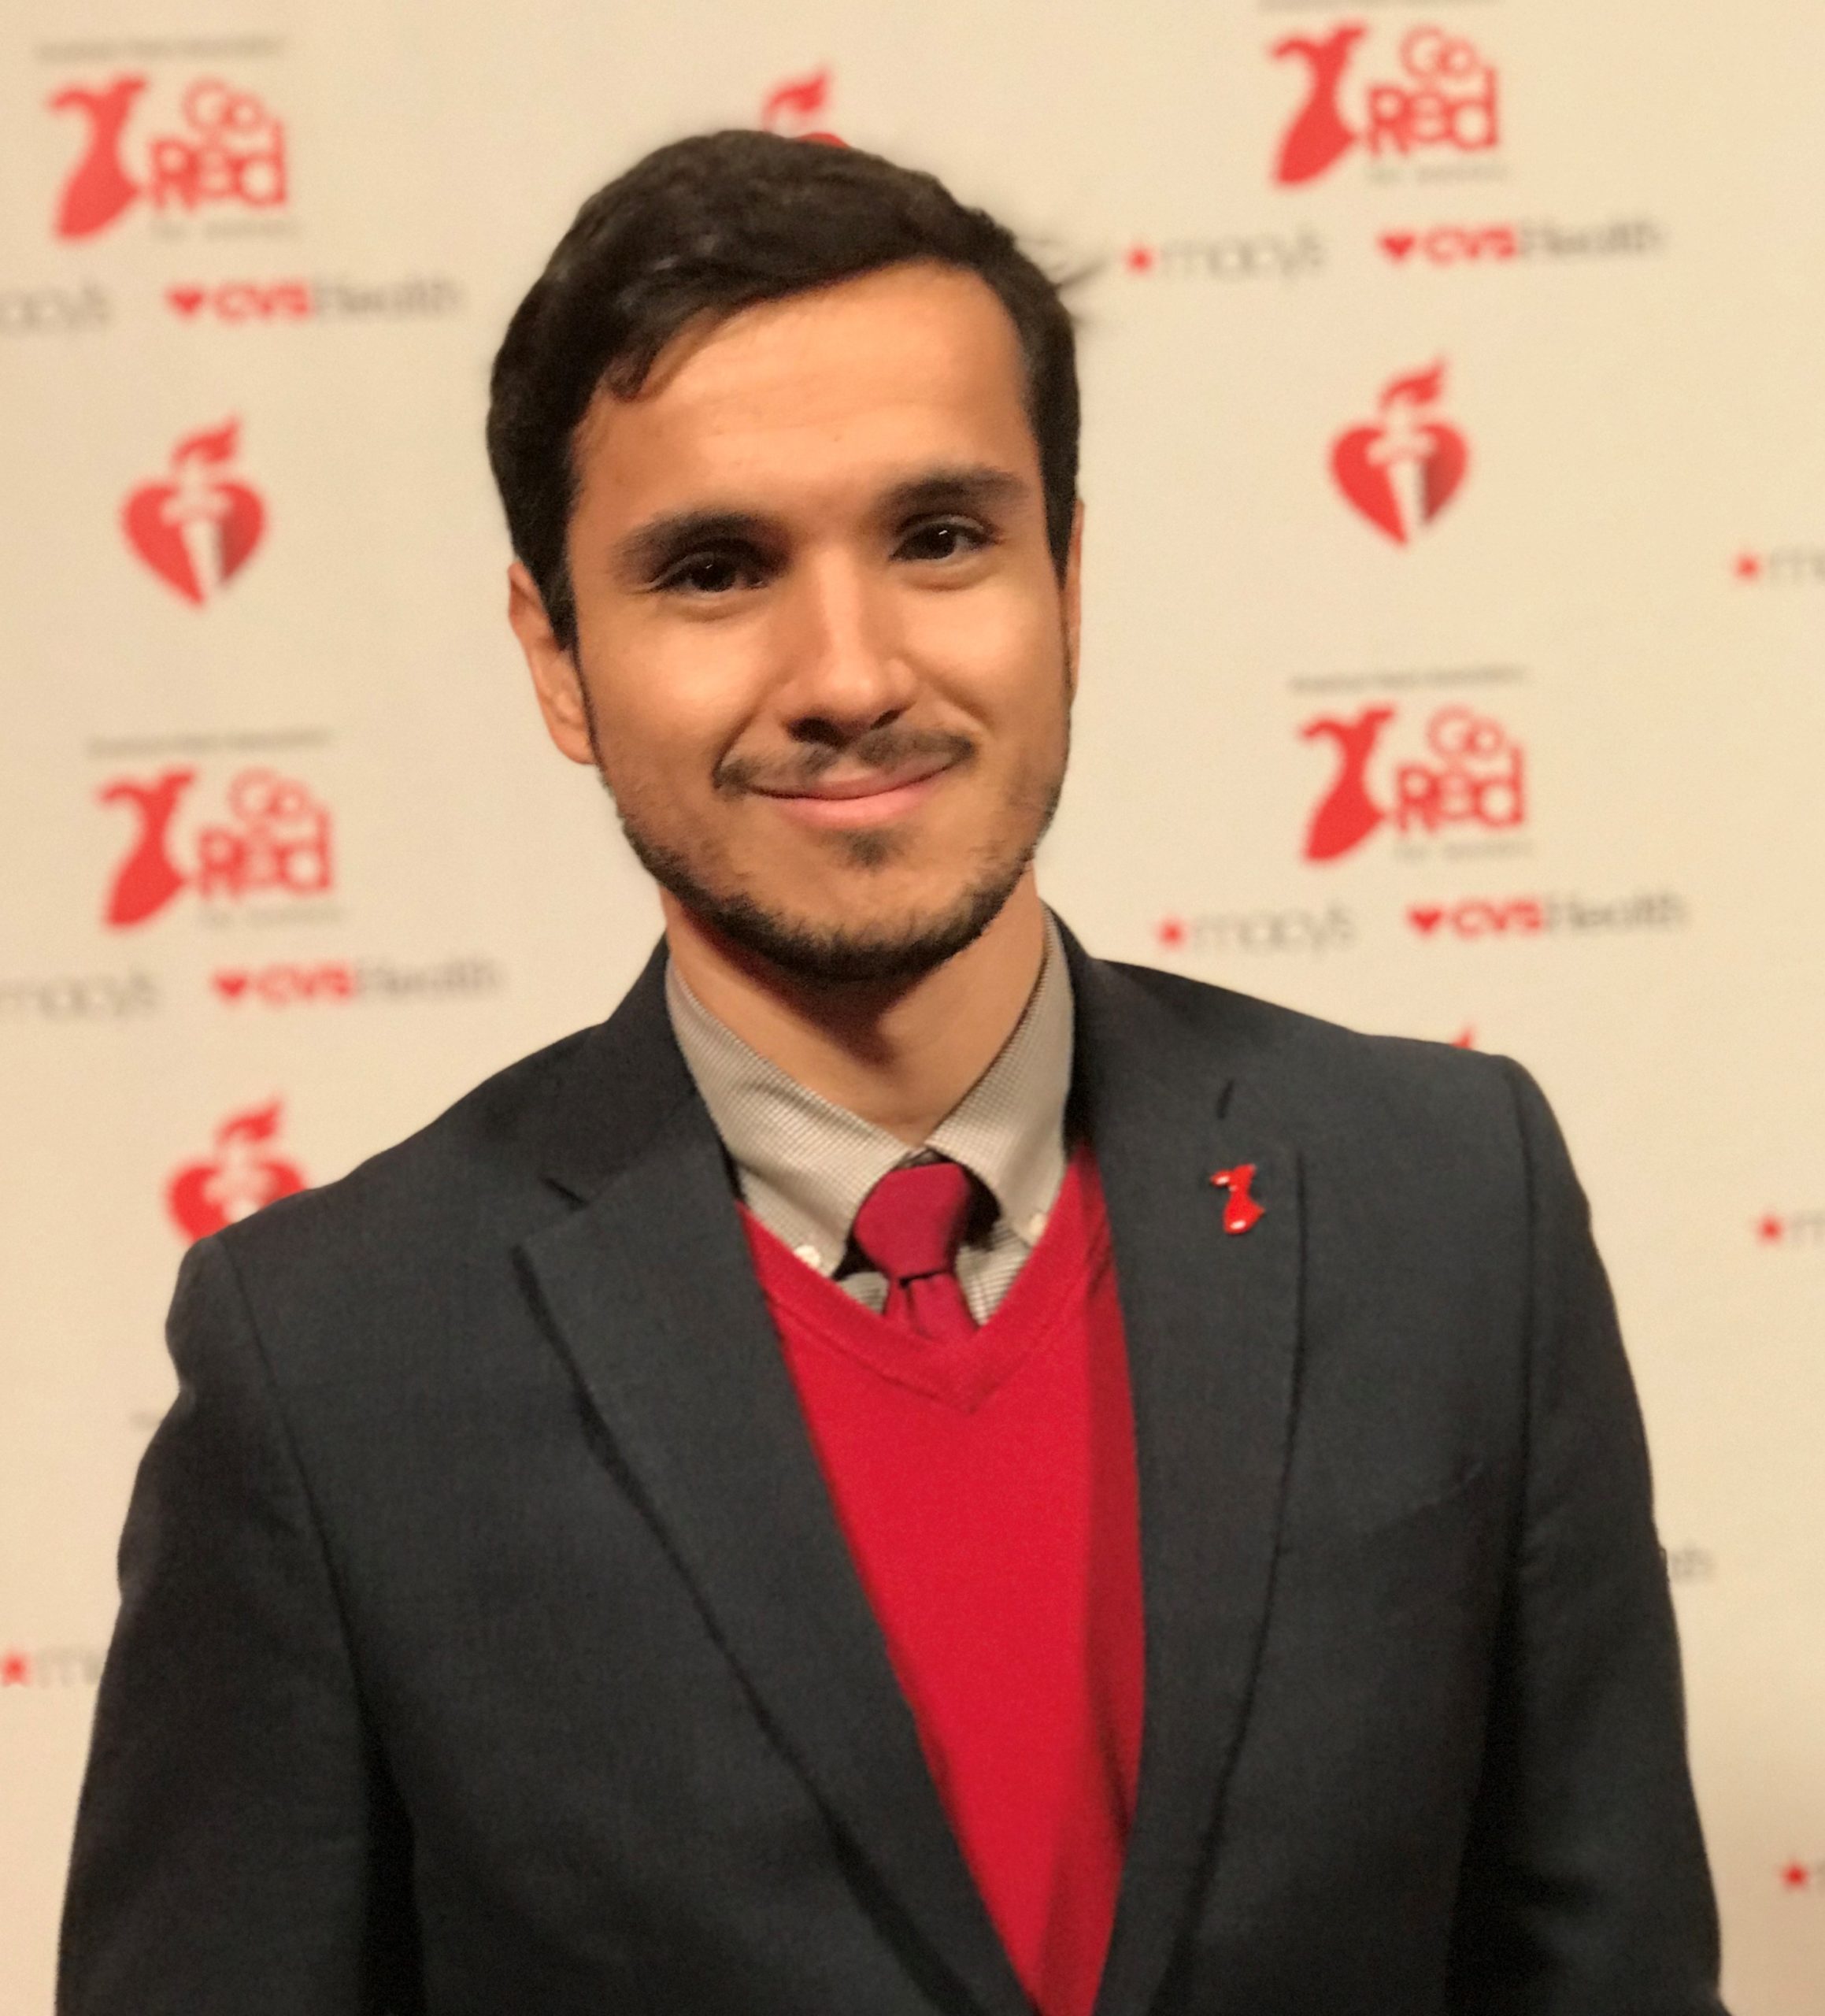 Young Stroke Survivor Runs Half Marathon for American Heart Association; Encourages Peers to Know the Symptoms F.A.S.T.